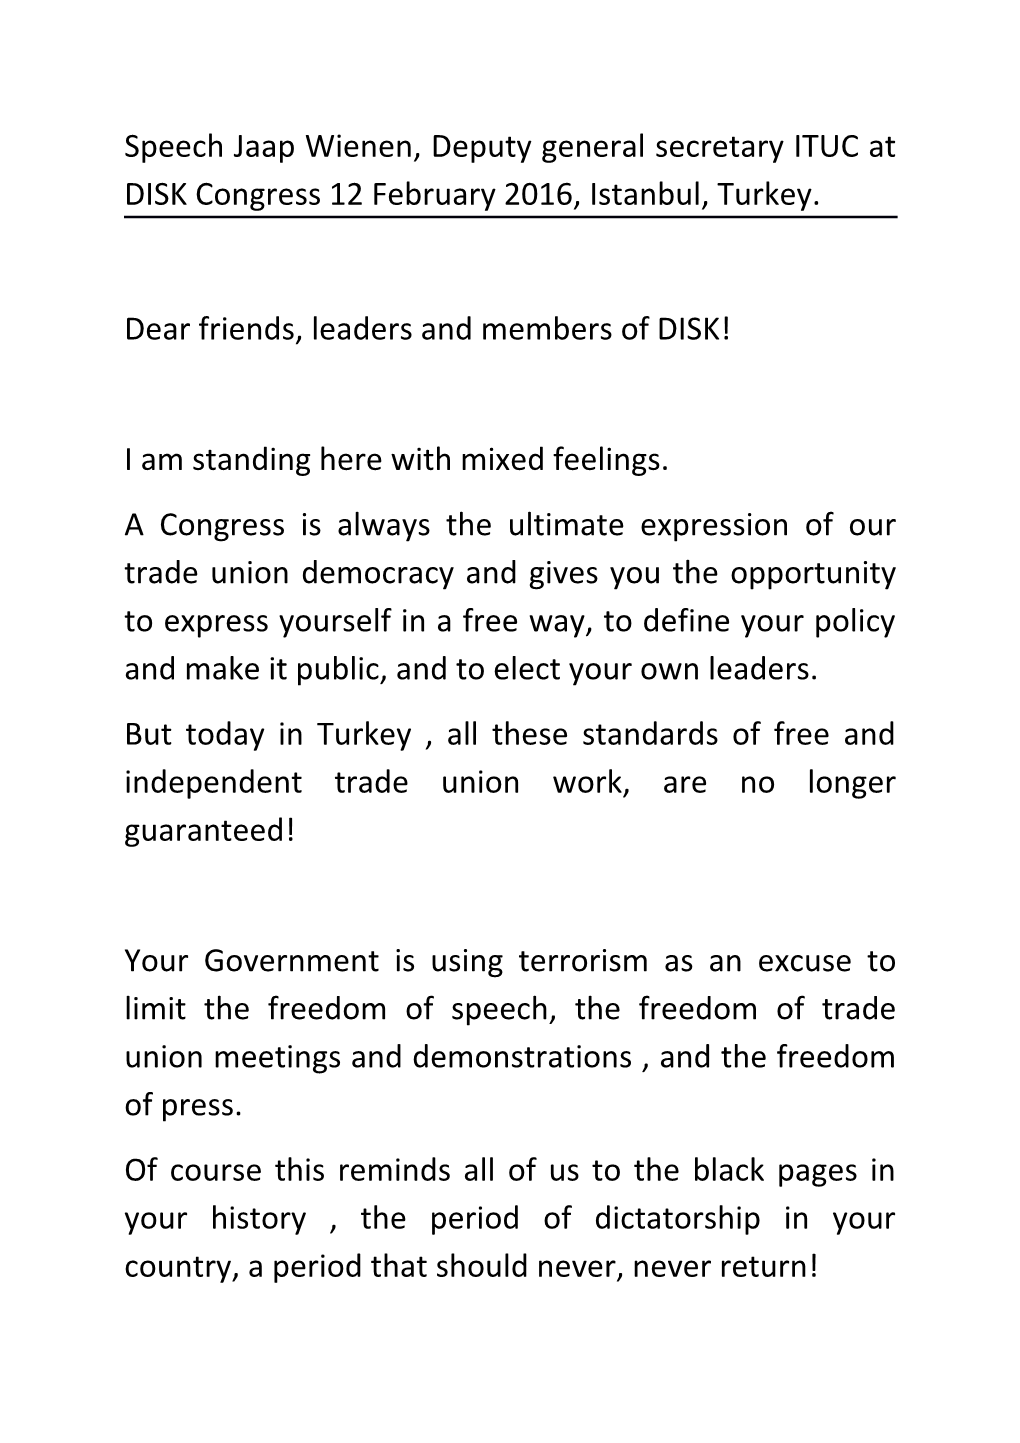 160208 Document to Friends, Leaders and Members of DISK!